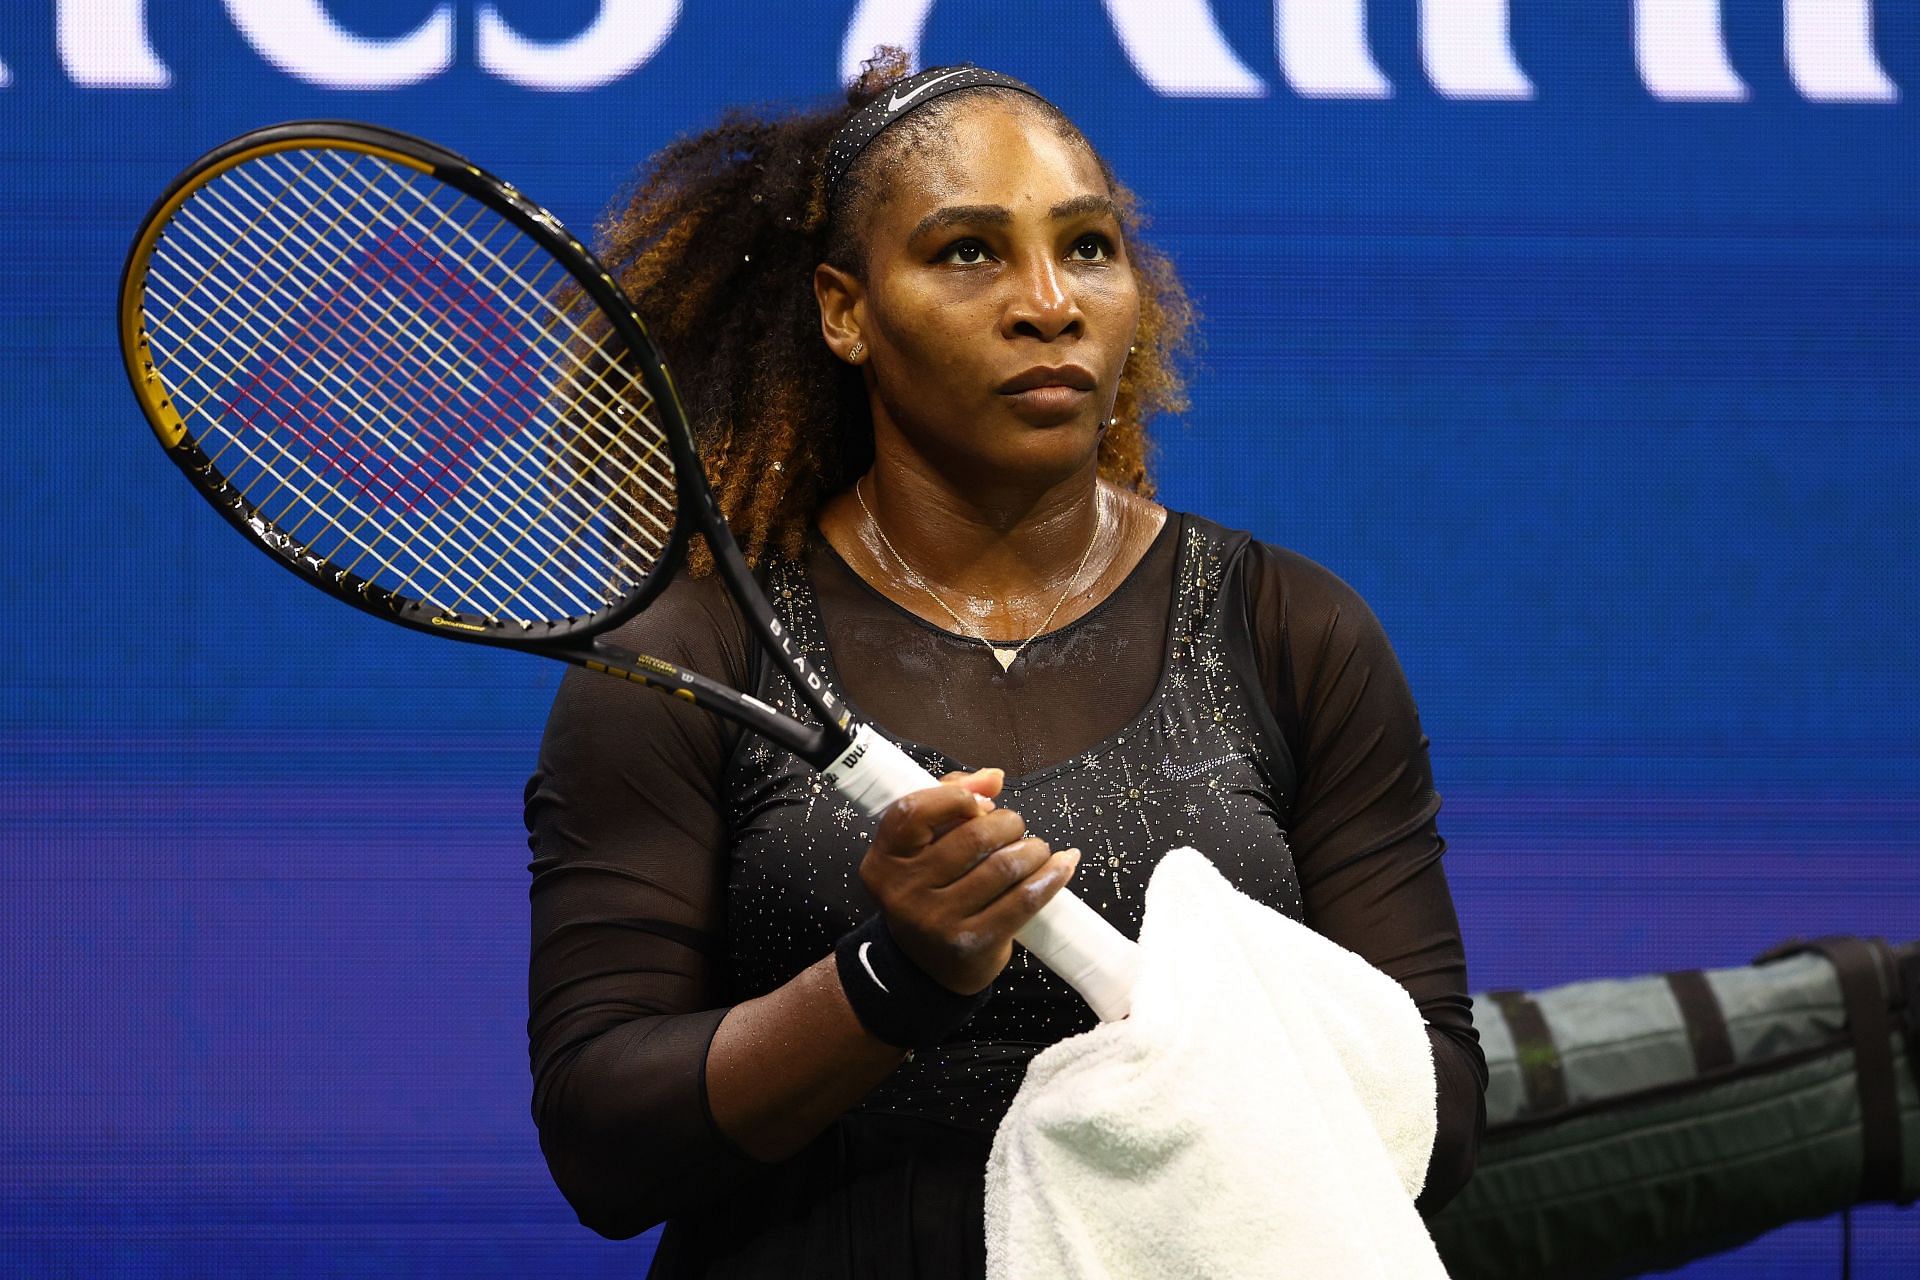 Serena Williams takes on Anett Kontaveit in the second round of the 2022 US Open